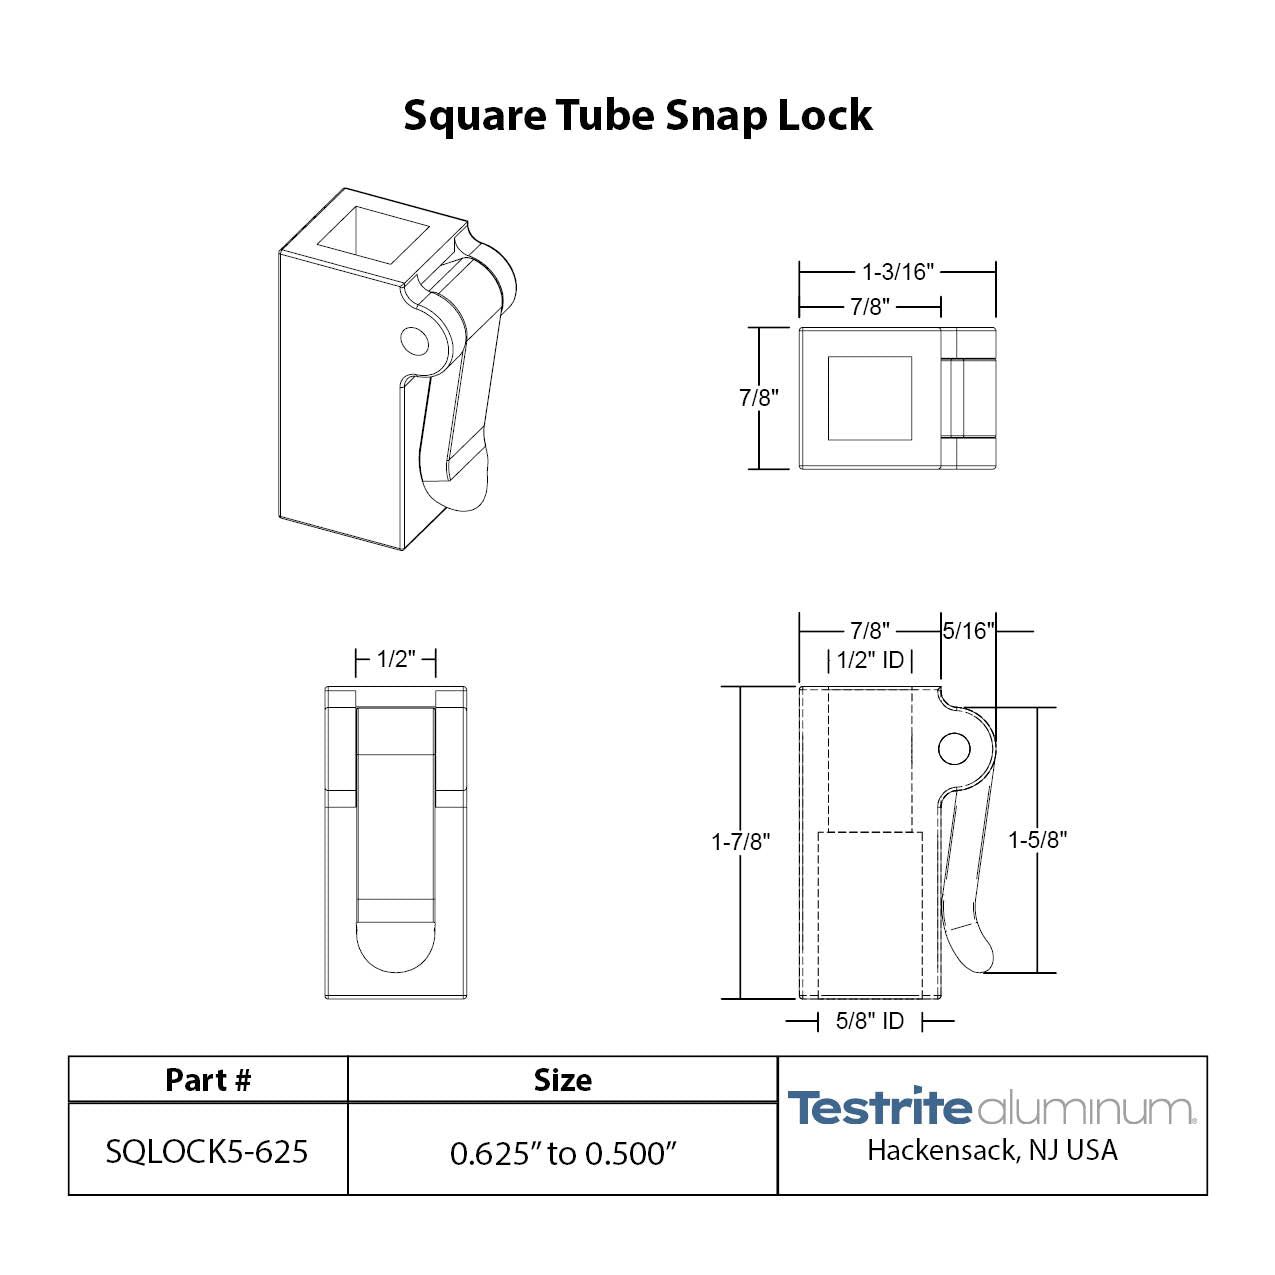 Specification sheet for Square telescopic tubing lock 1/2" to 5/8" square 0.5" to 0.625" square telescopic tubing lock plastic 